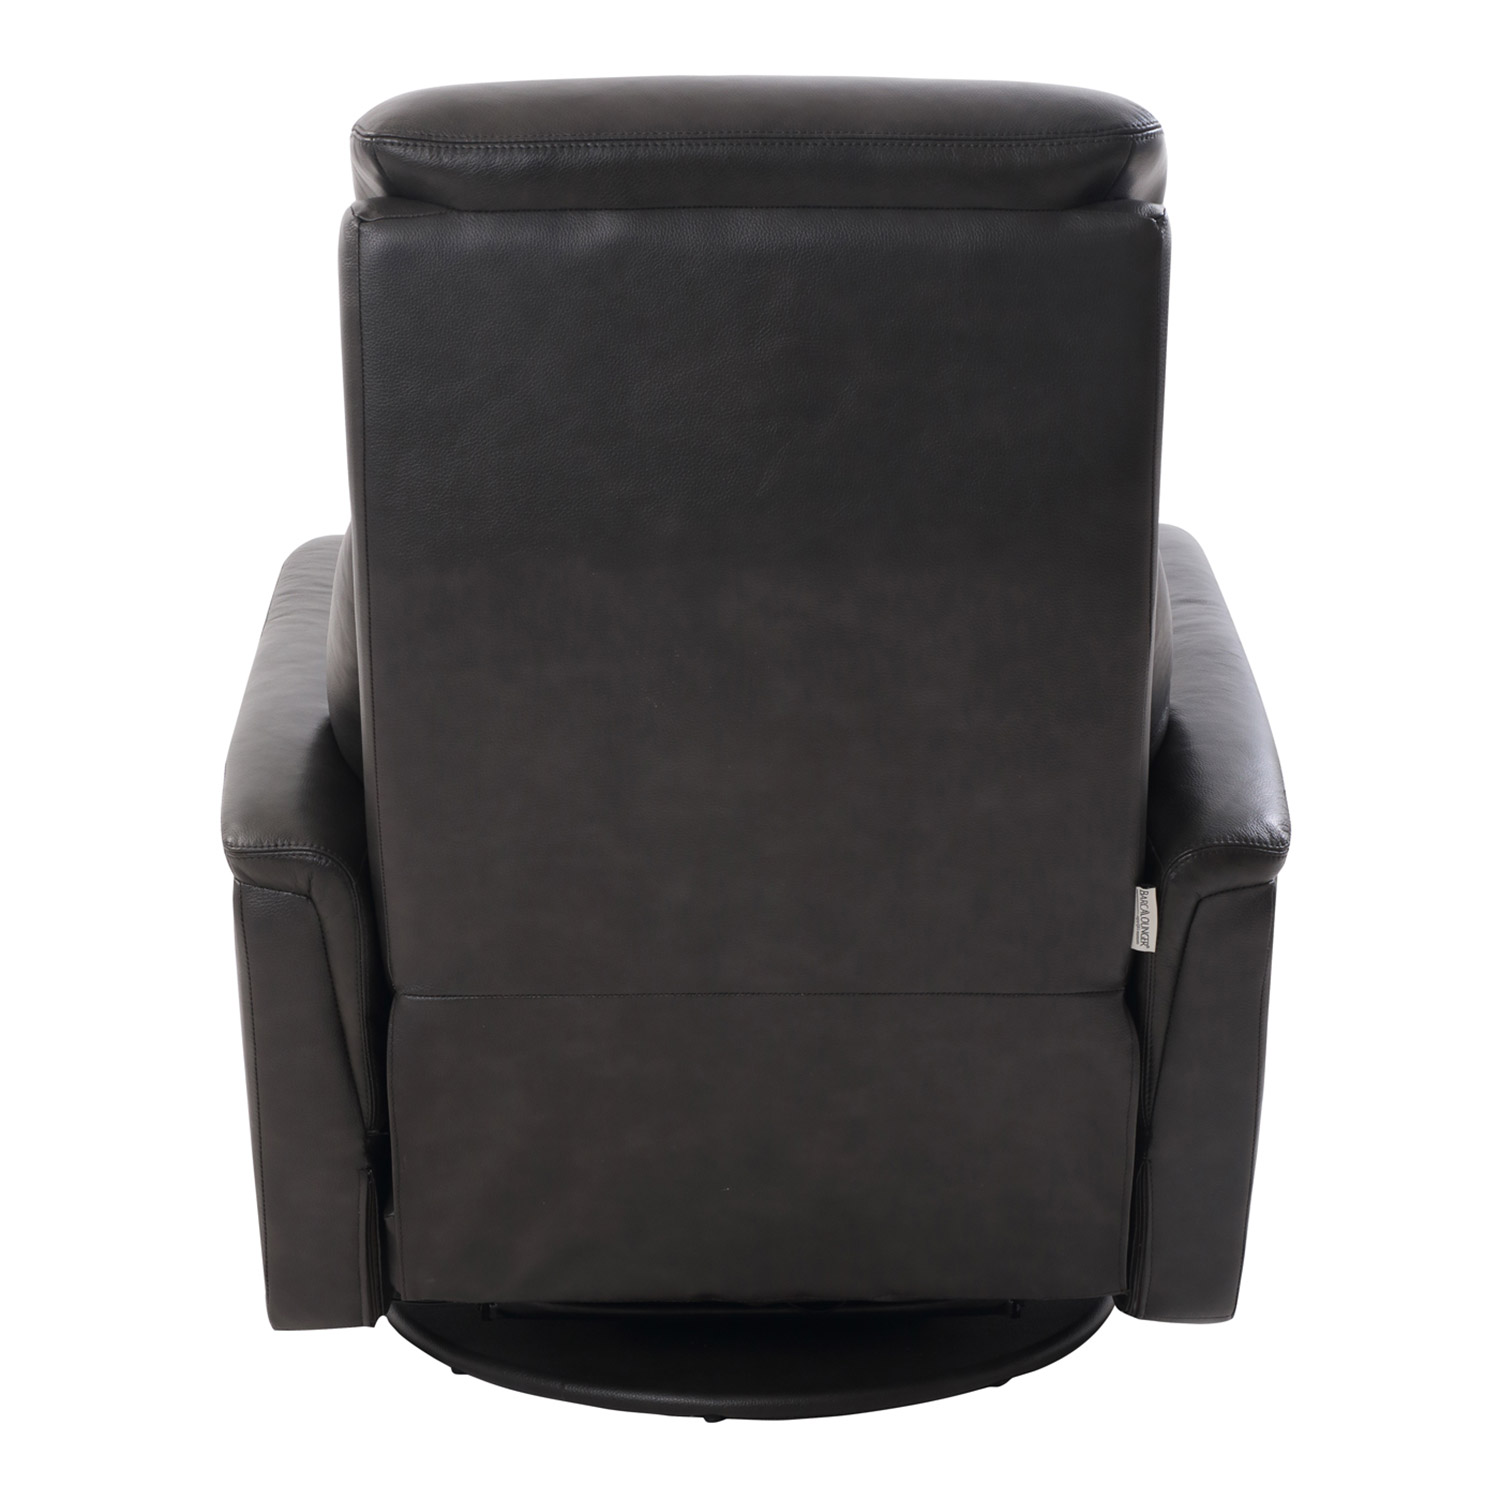 Barcalounger Powell Swivel Glider Recliner Chair with Power Head Rest - Chelsea Graphite/Leather Match